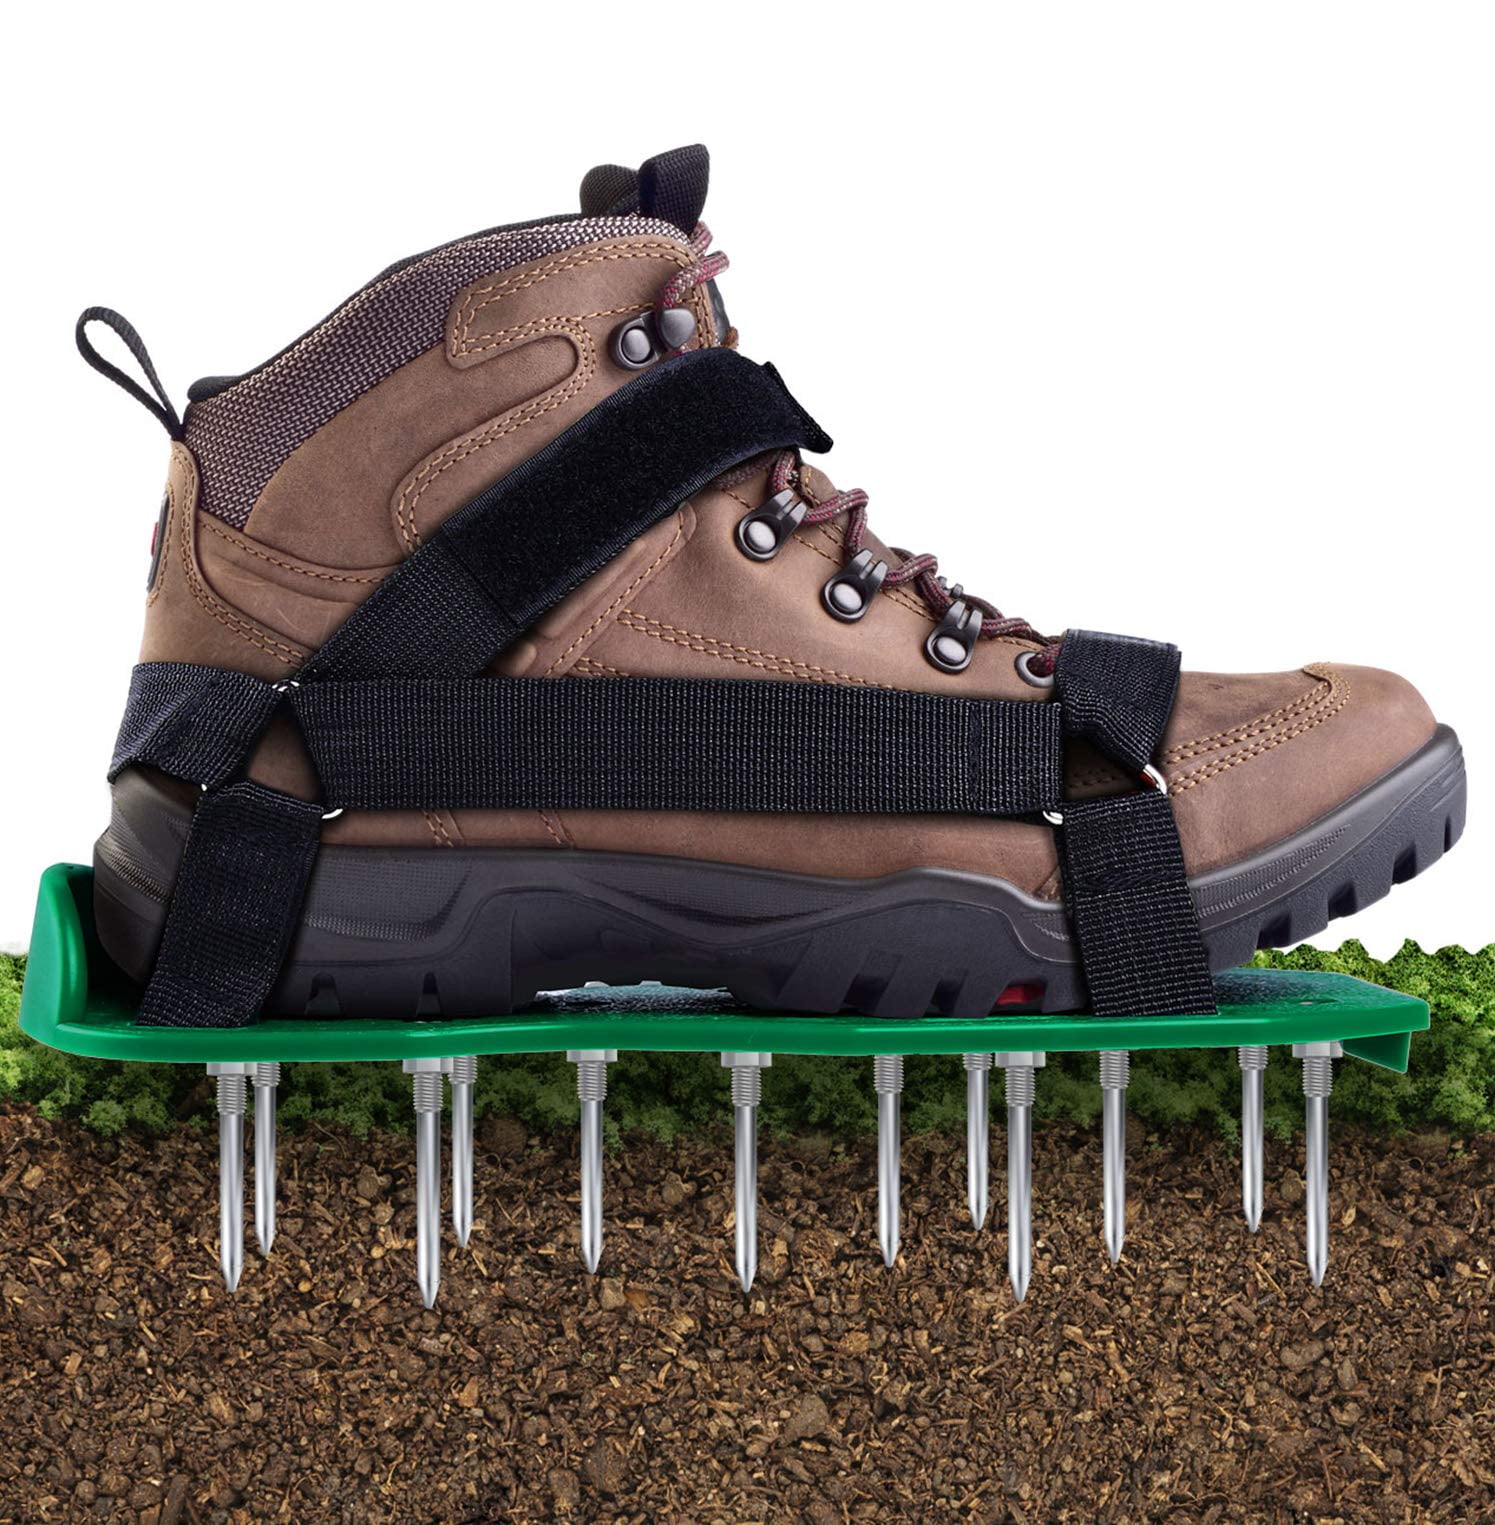 Lawn Aerating Spiked Shoes Grass Aerator Sandals Adjustable Straps Pukkr 